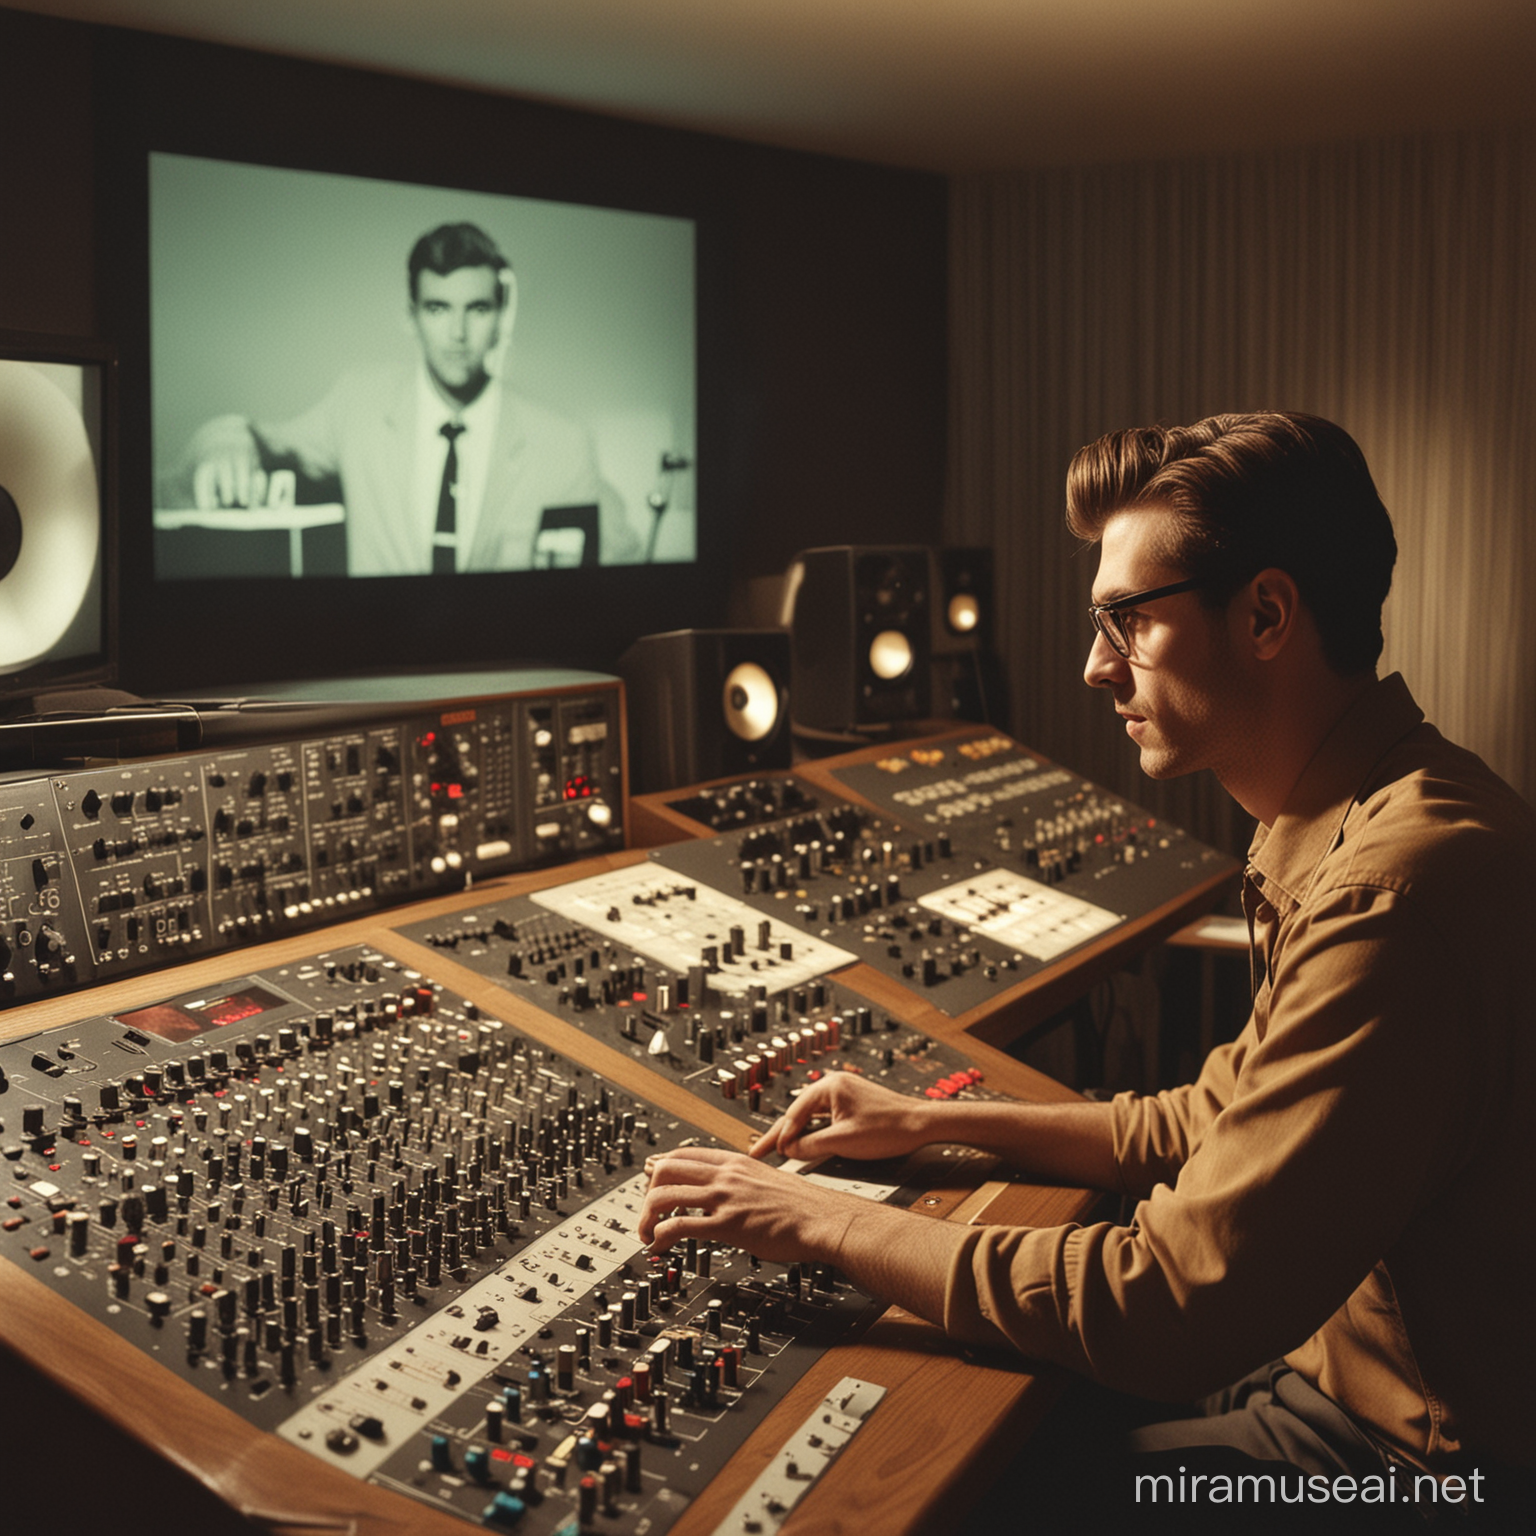 sound studio, retro looking, modern equipment, midcentury, close up shot, film post production, man sat at mixing desk, film playing on projector screen

